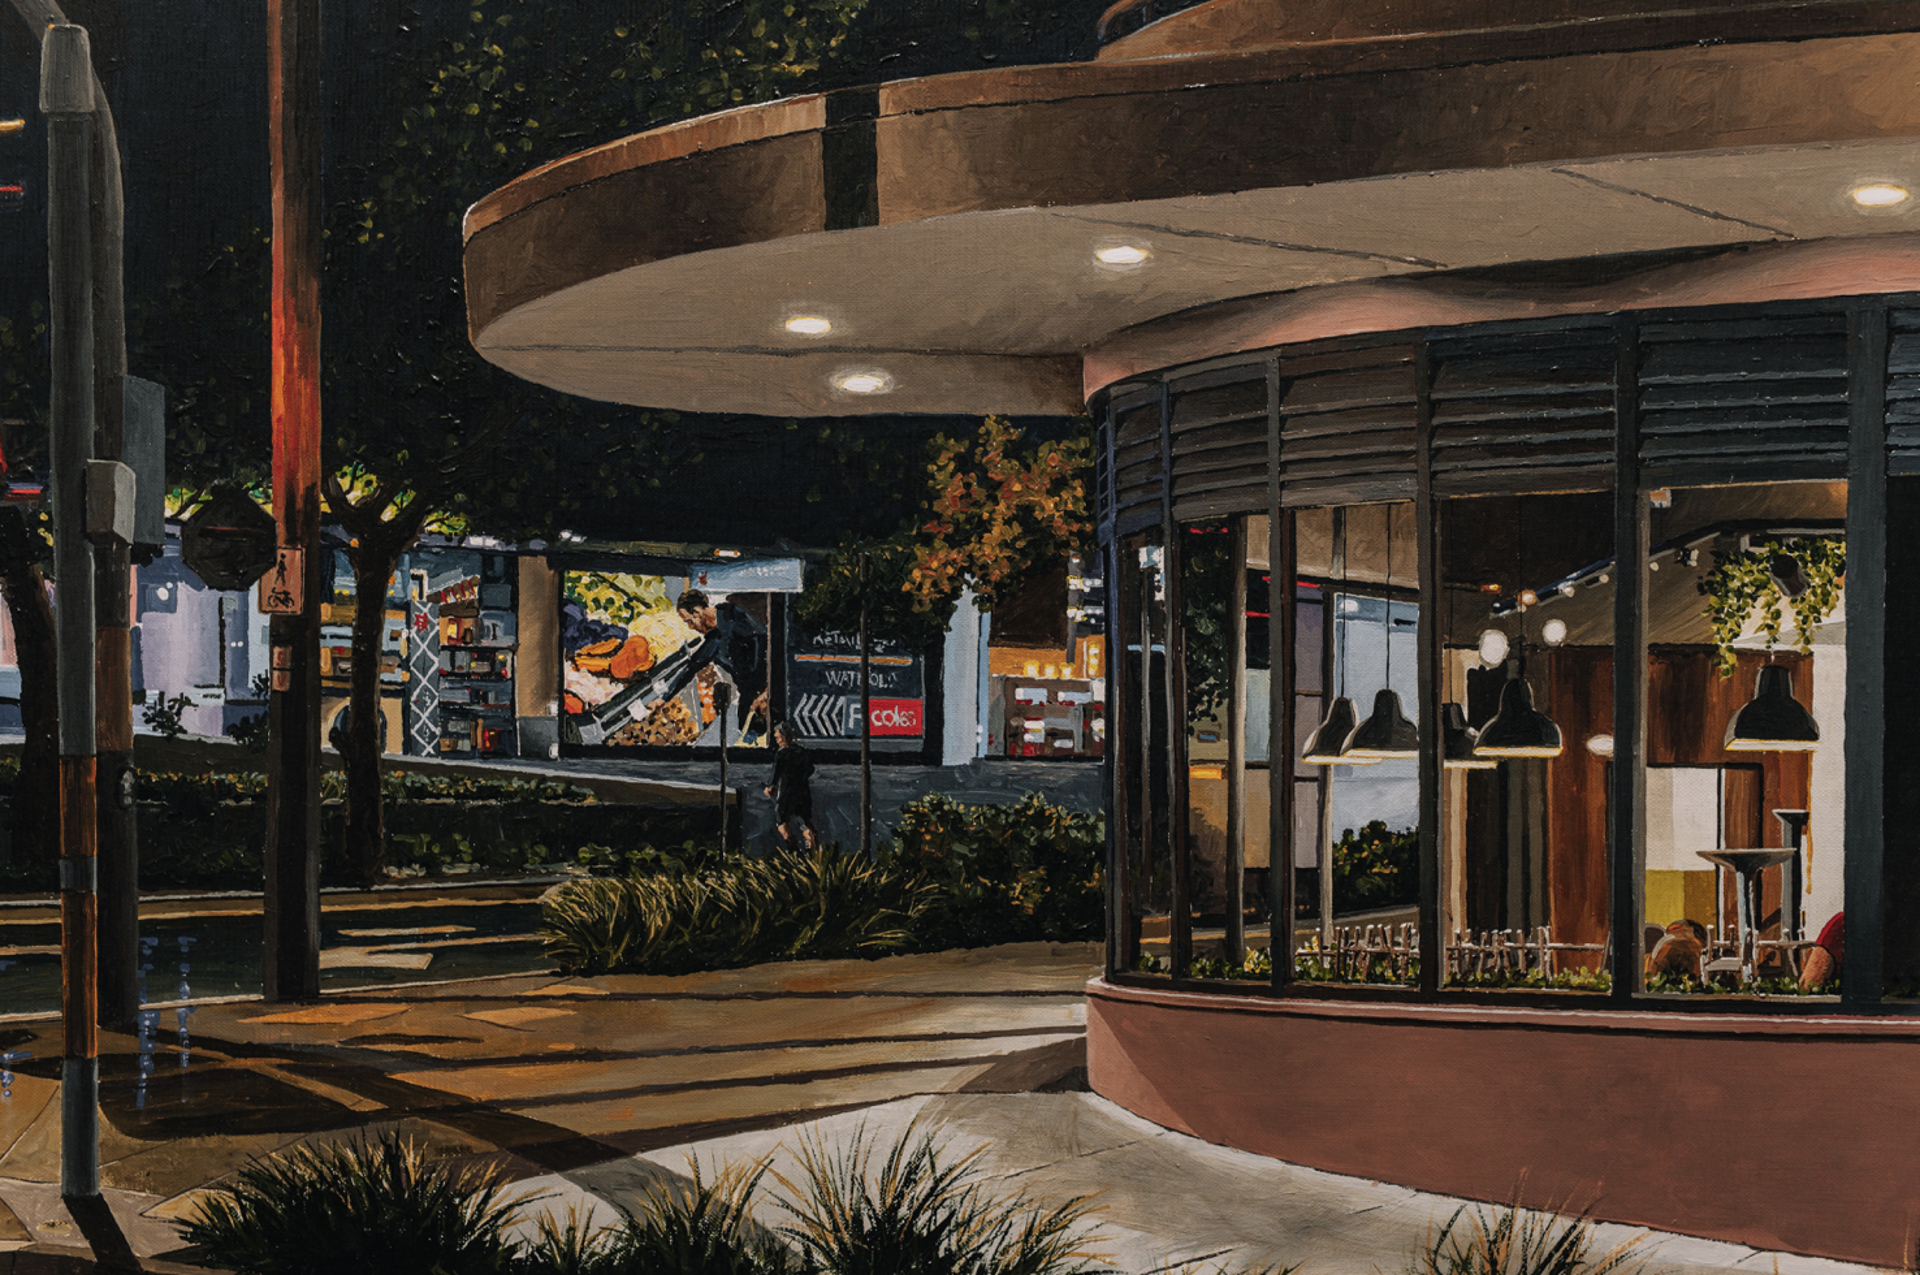 Redfern After Hours by Donald Keys